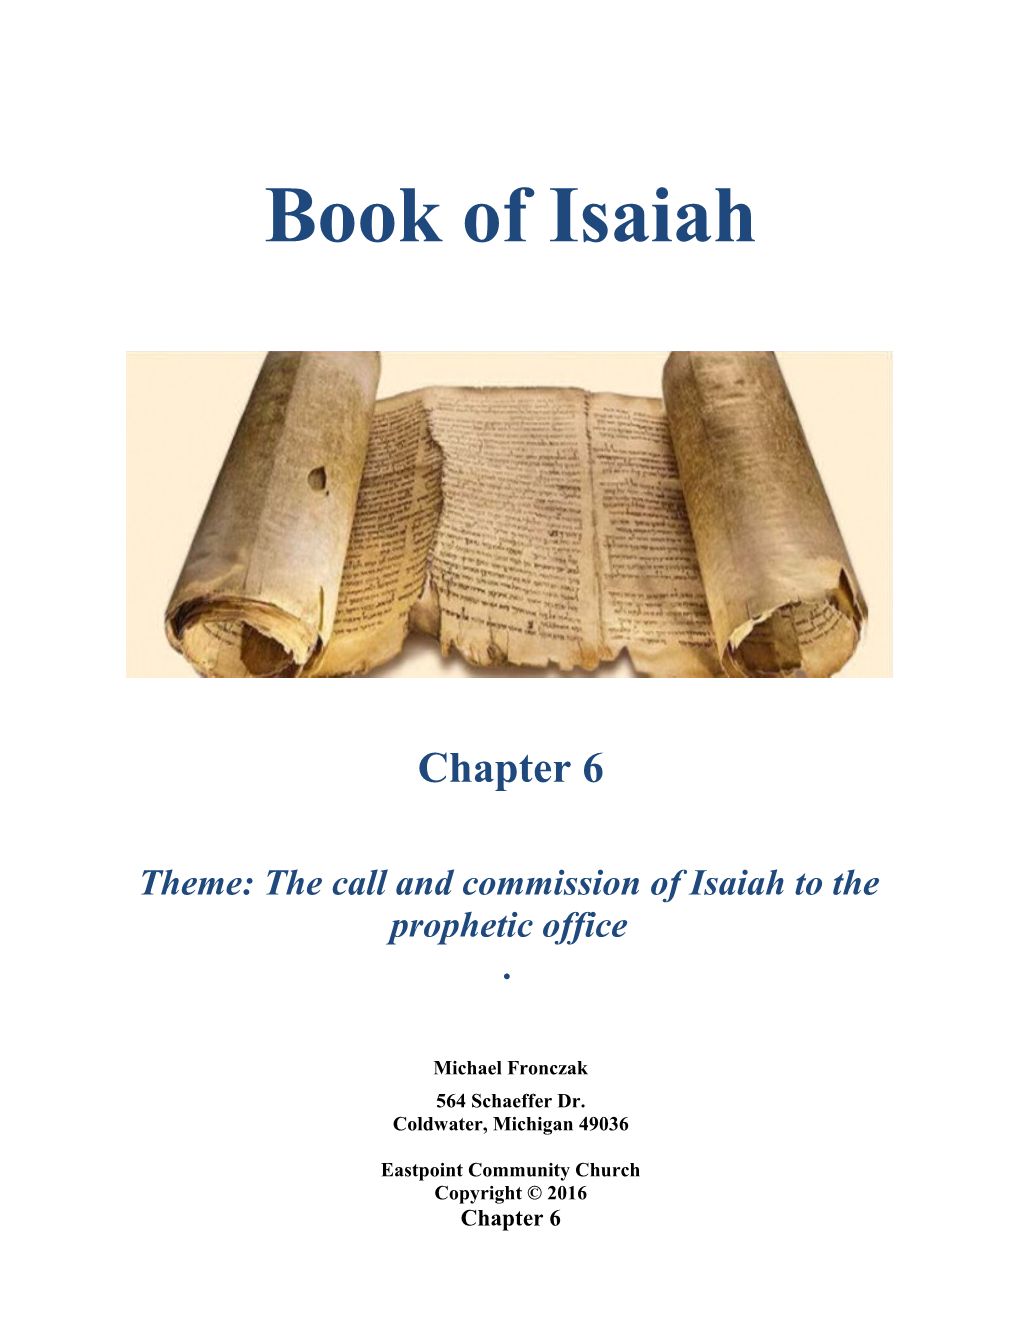 Theme: the Call and Commission of Isaiah to the Prophetic Office